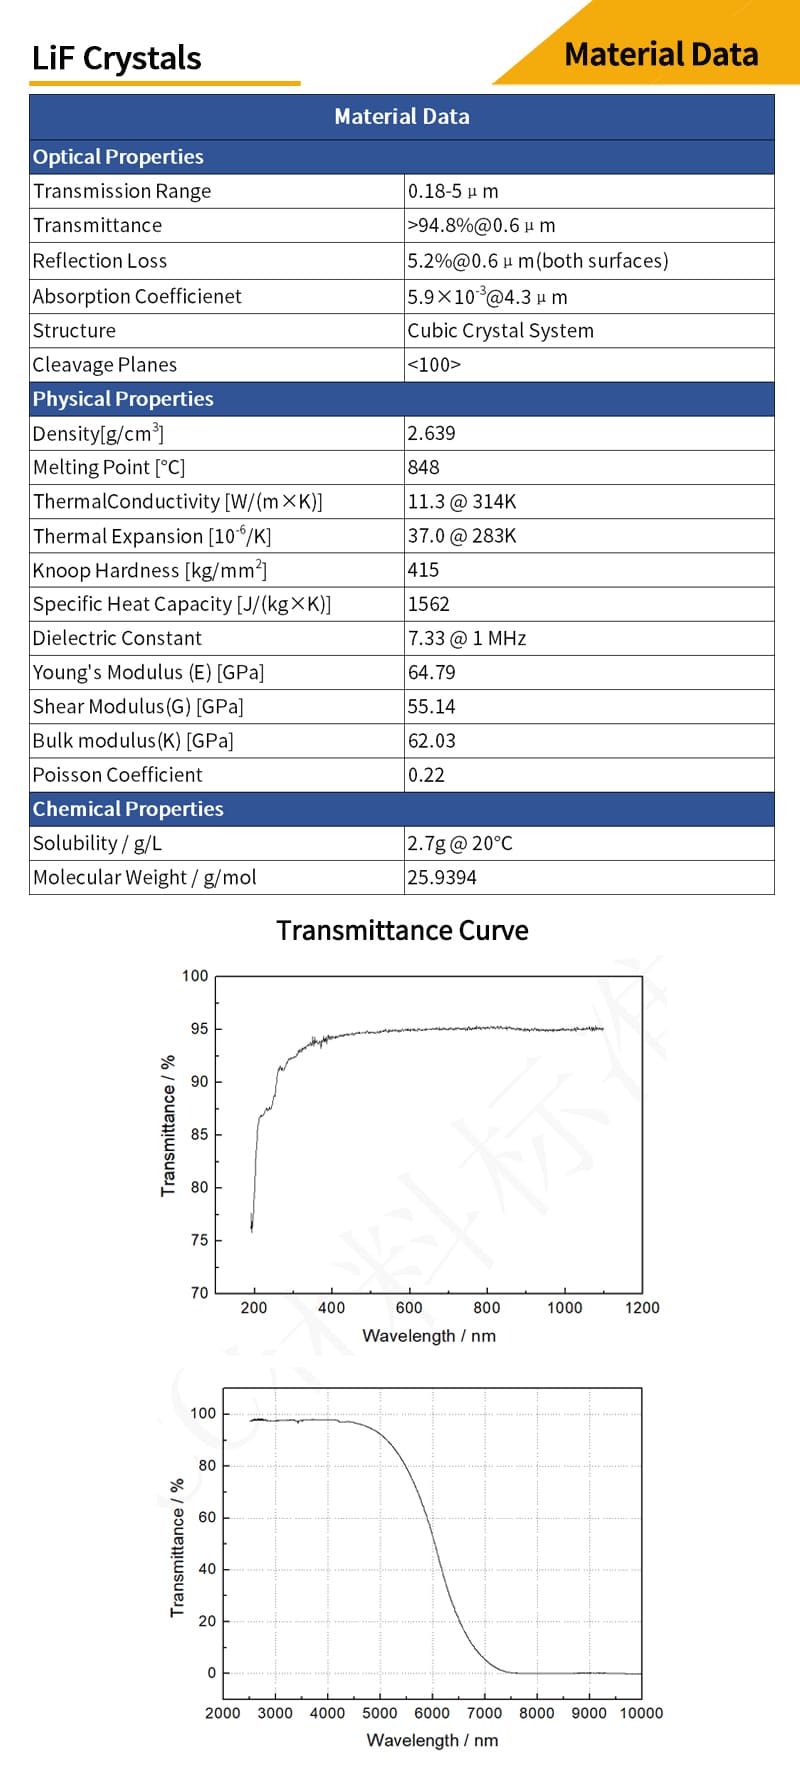 Lithium fluoride rectangular window material data and transmittance curves